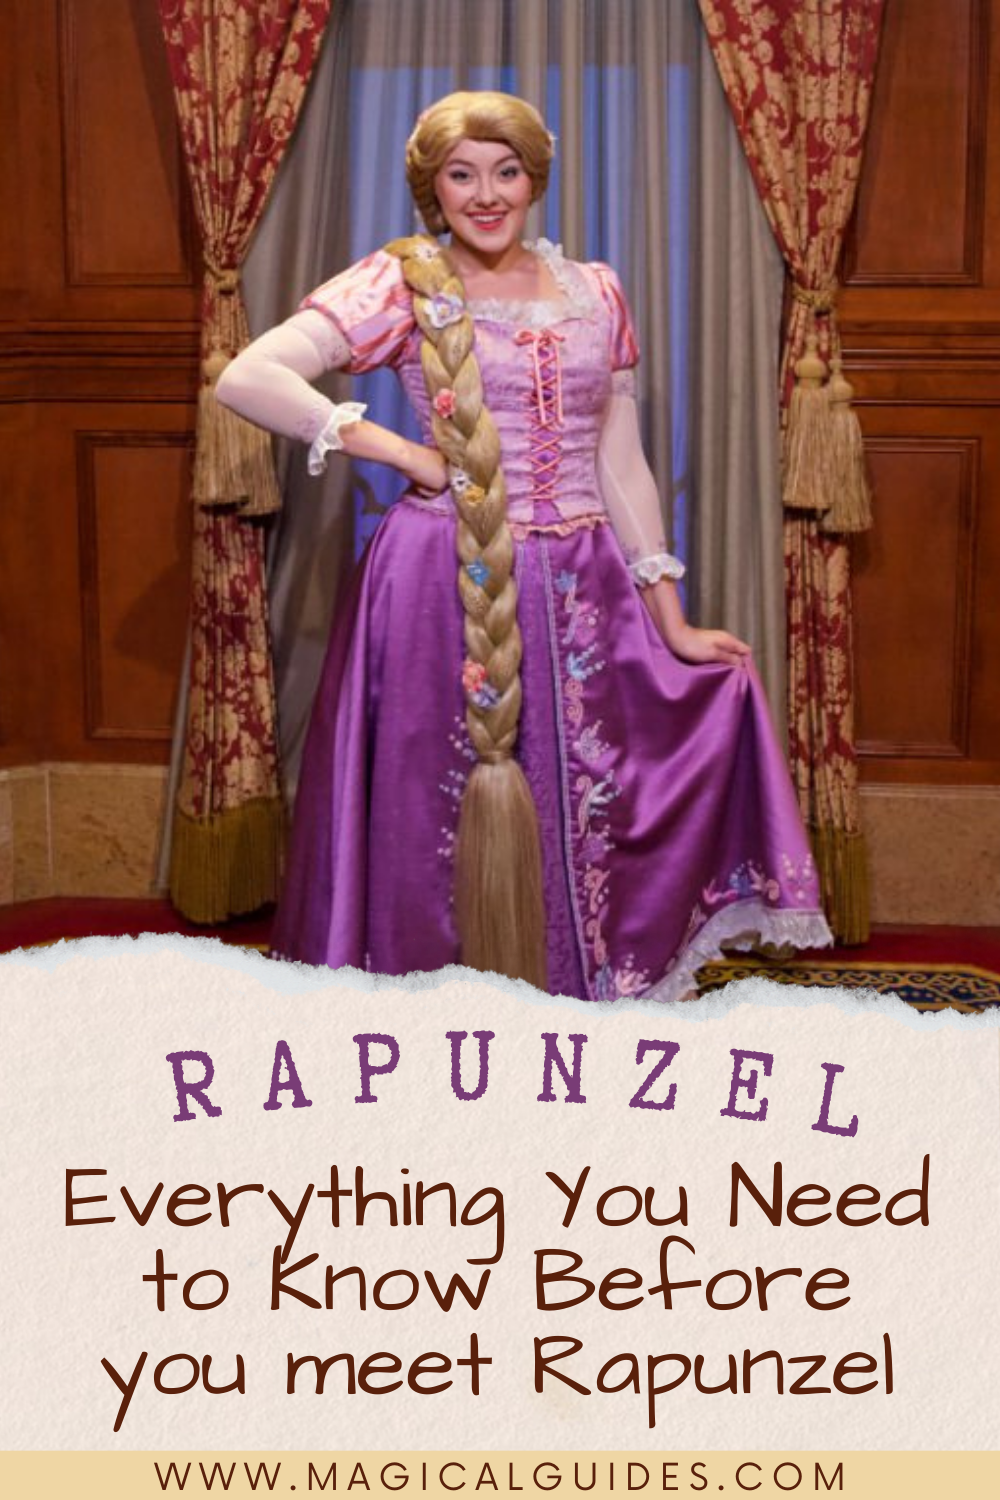 There are many places Tangled fans can meet Rapunzel at Disney World. Find where to meet Rapunzel at Disney World, Disneybound outfit inspirations, and what to ask her when you get to meet her. A complete guide to meeting Rapunzel at Walt Disney World on your next vacation.